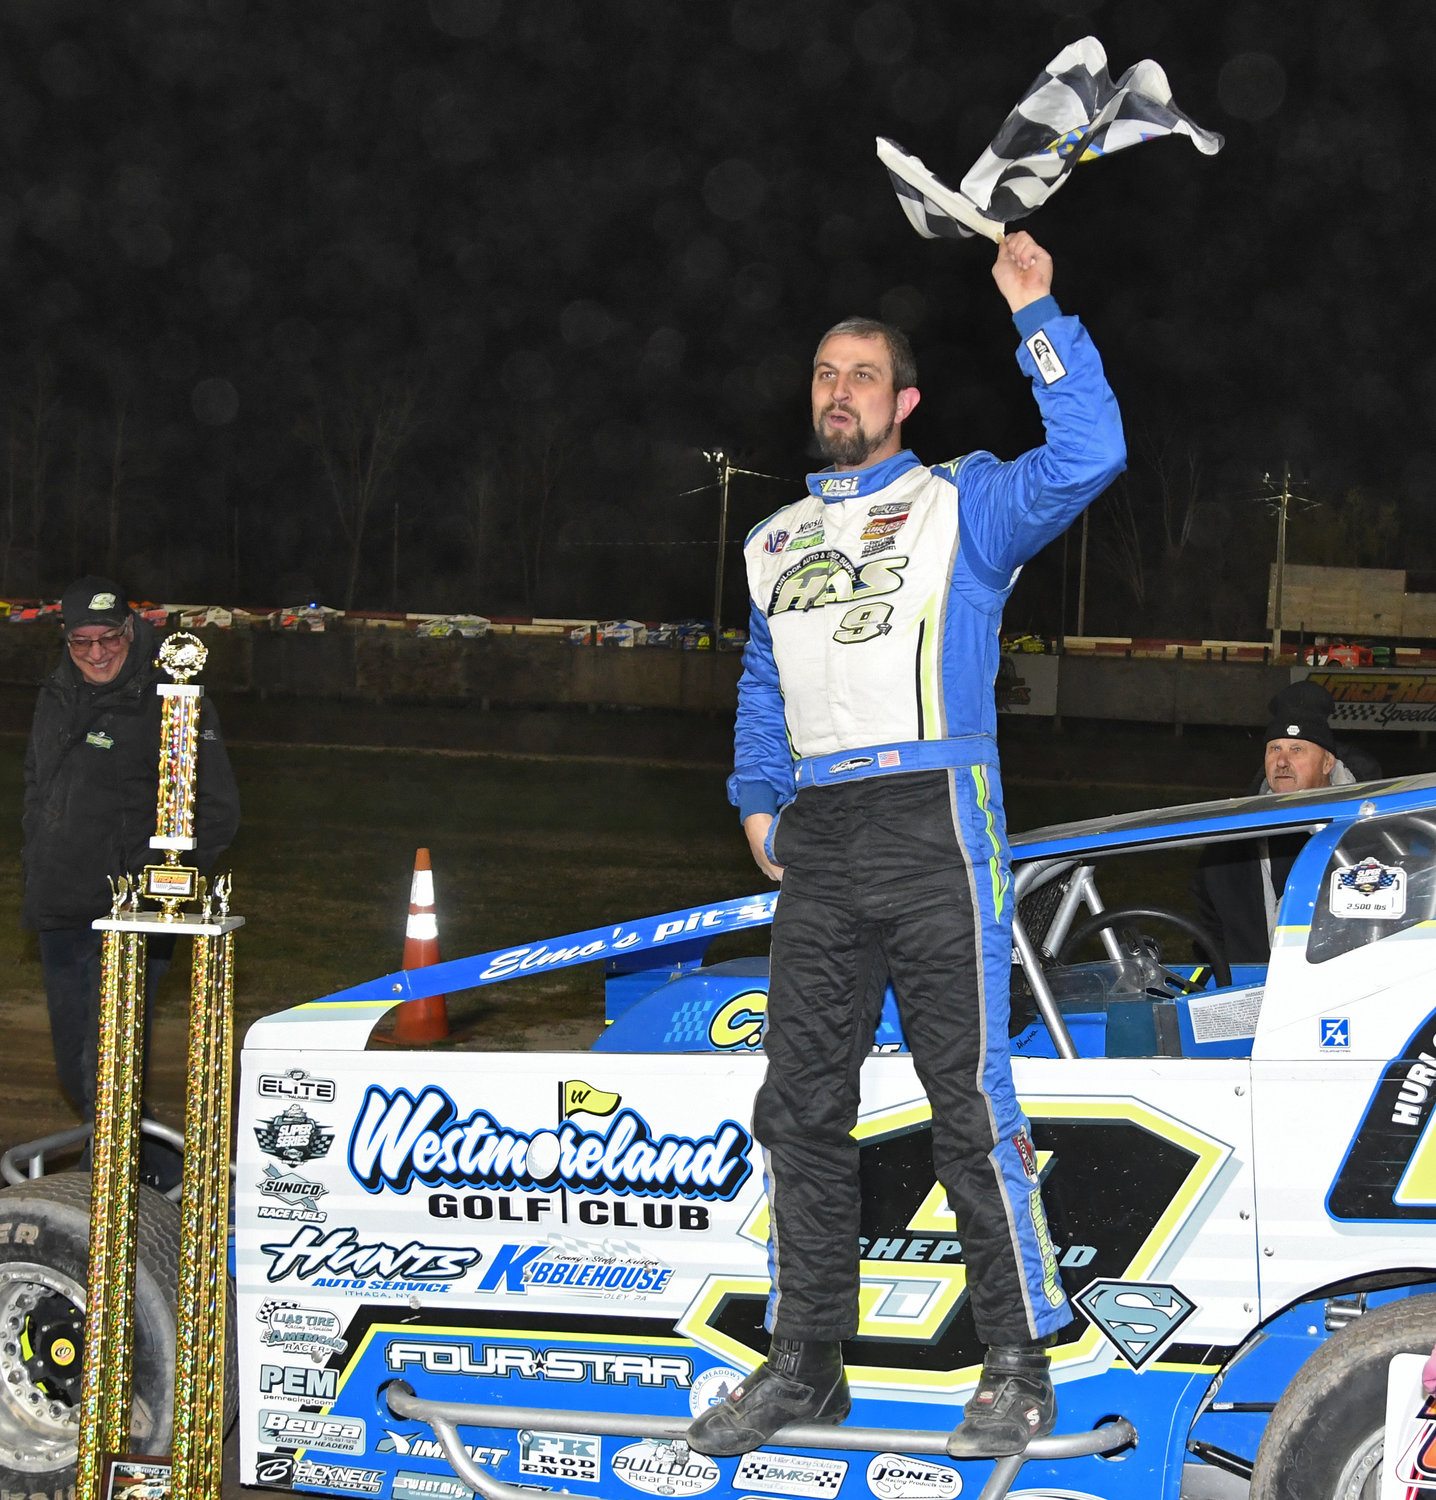 Matt Sheppard, of Savannah, N.Y., celebrates his win at Utica-Rome Speedway in Vernon Friday night after winning the 30-lap “Honoring Alex” $6,800-to-win modified race.